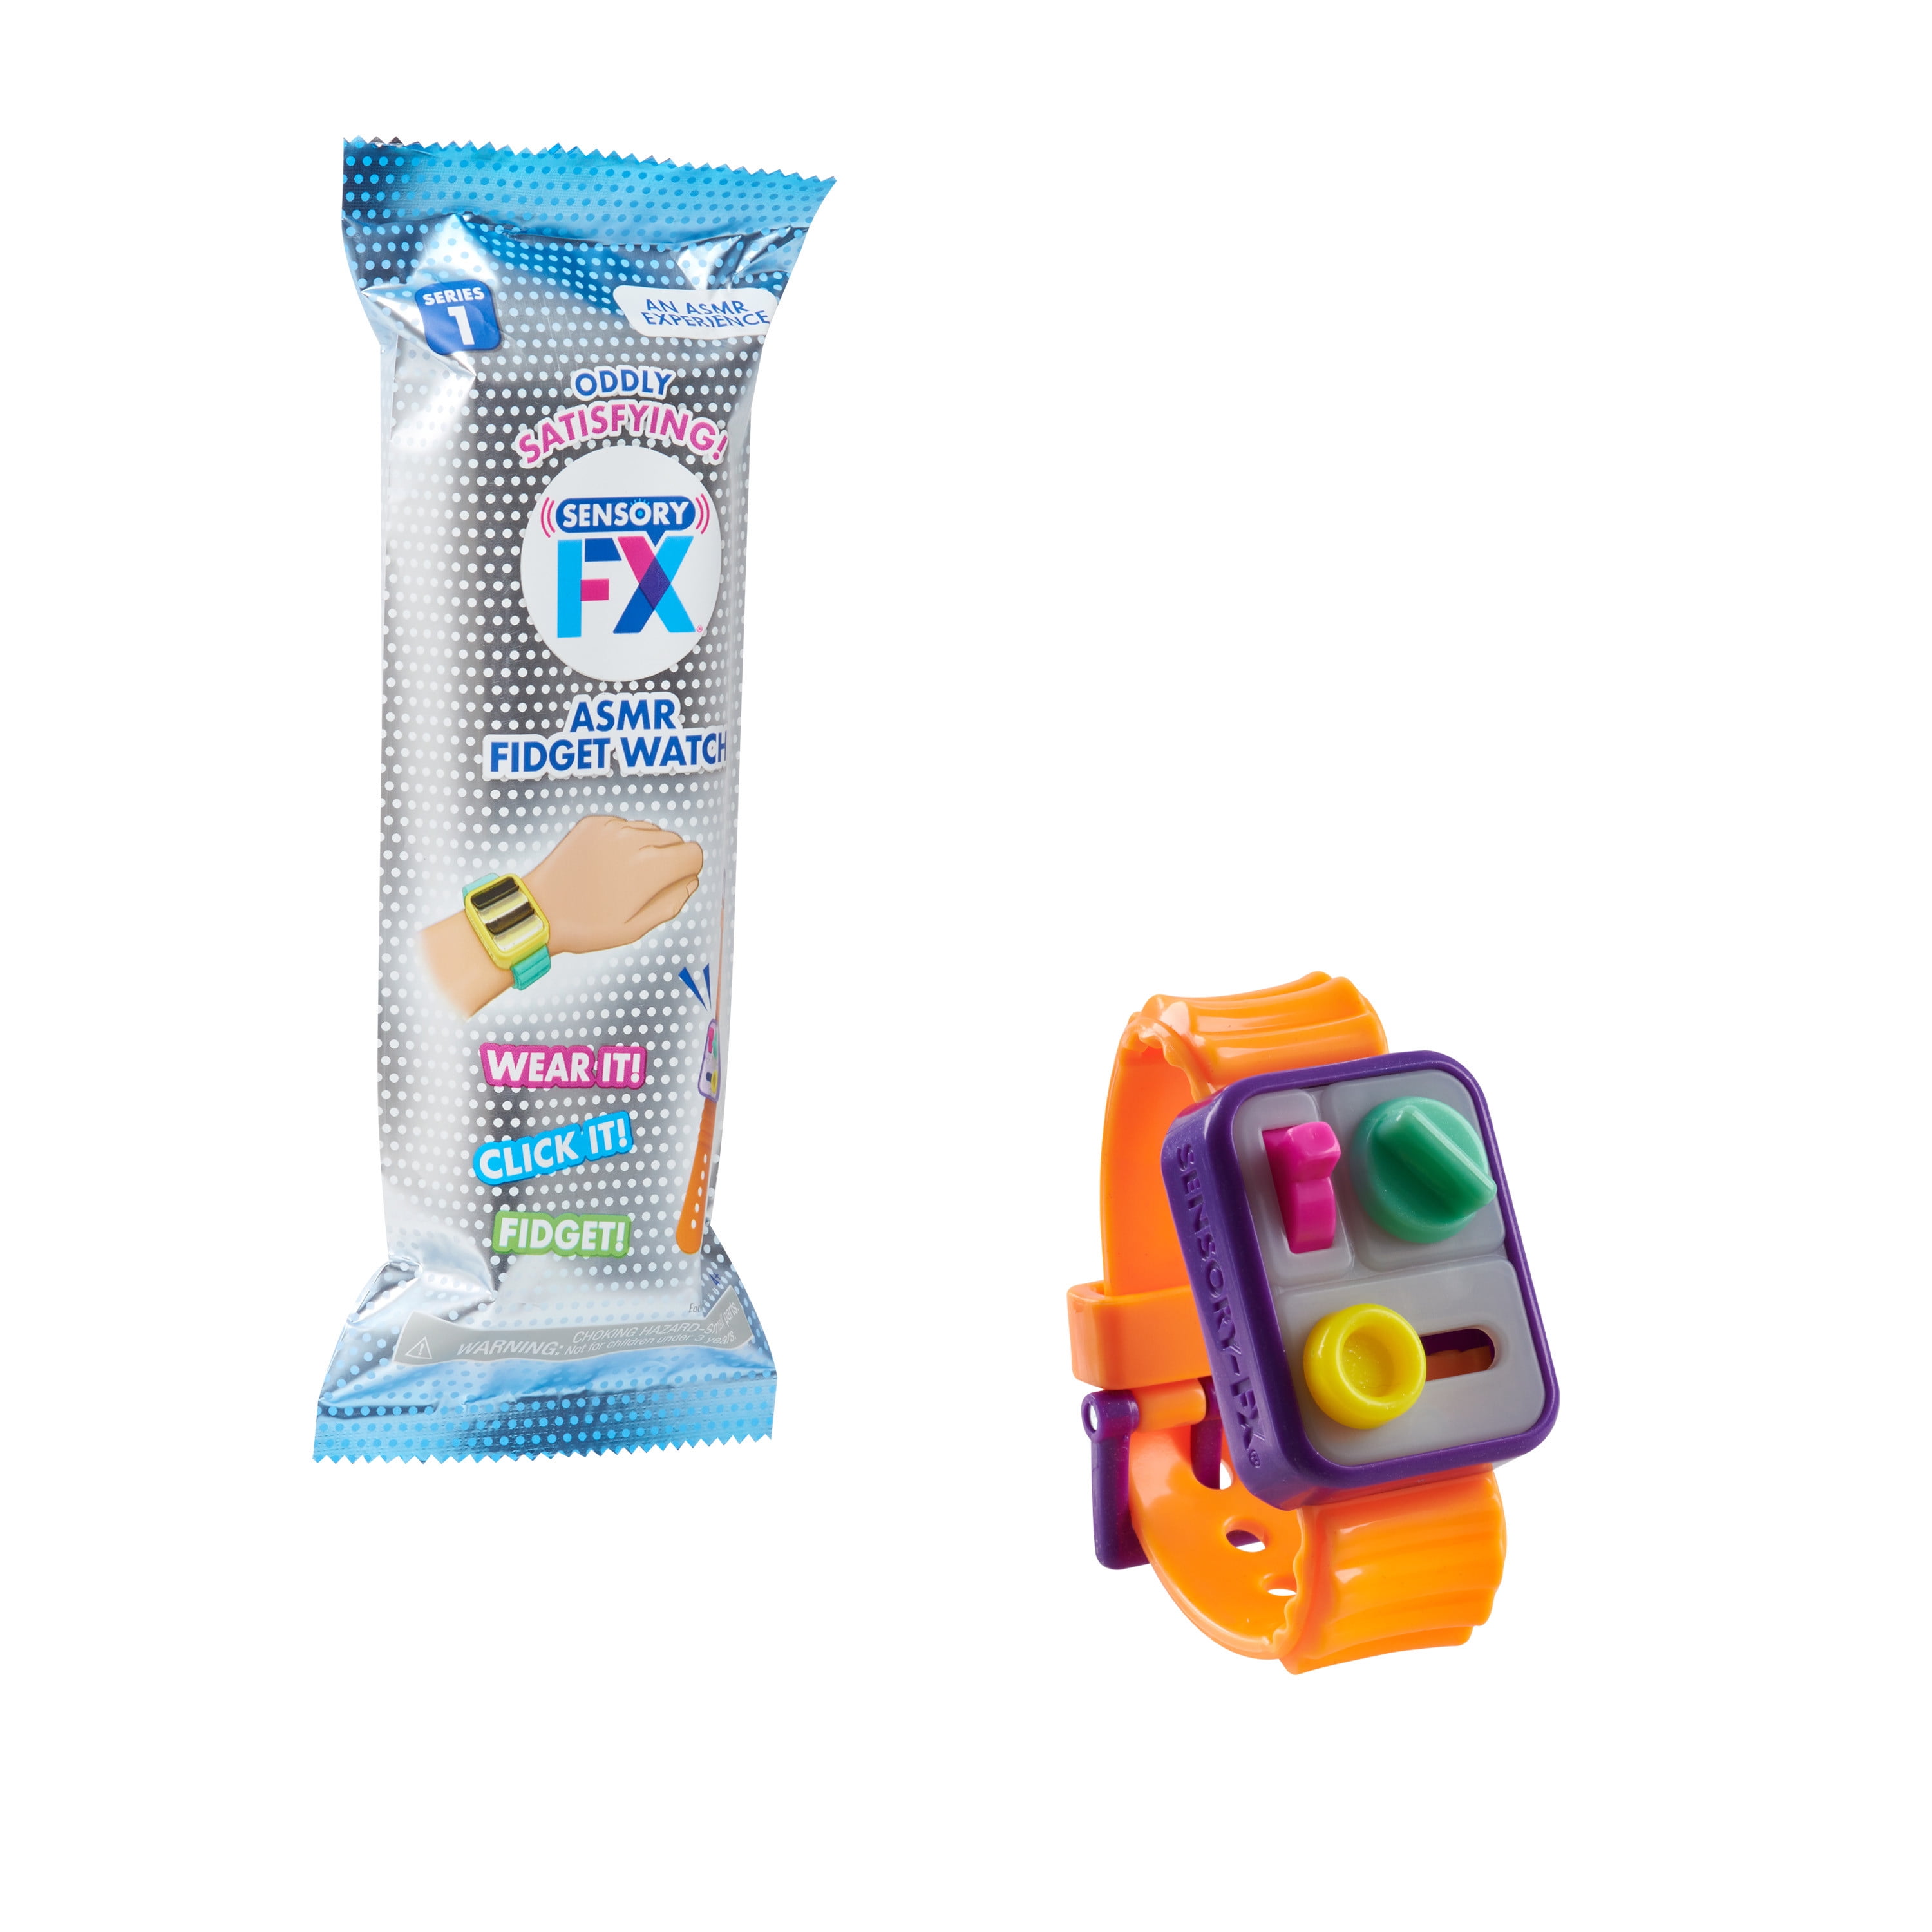 Sensory FX ASMR Watch,  Kids Toys for Ages 4 Up, Gifts and Presents